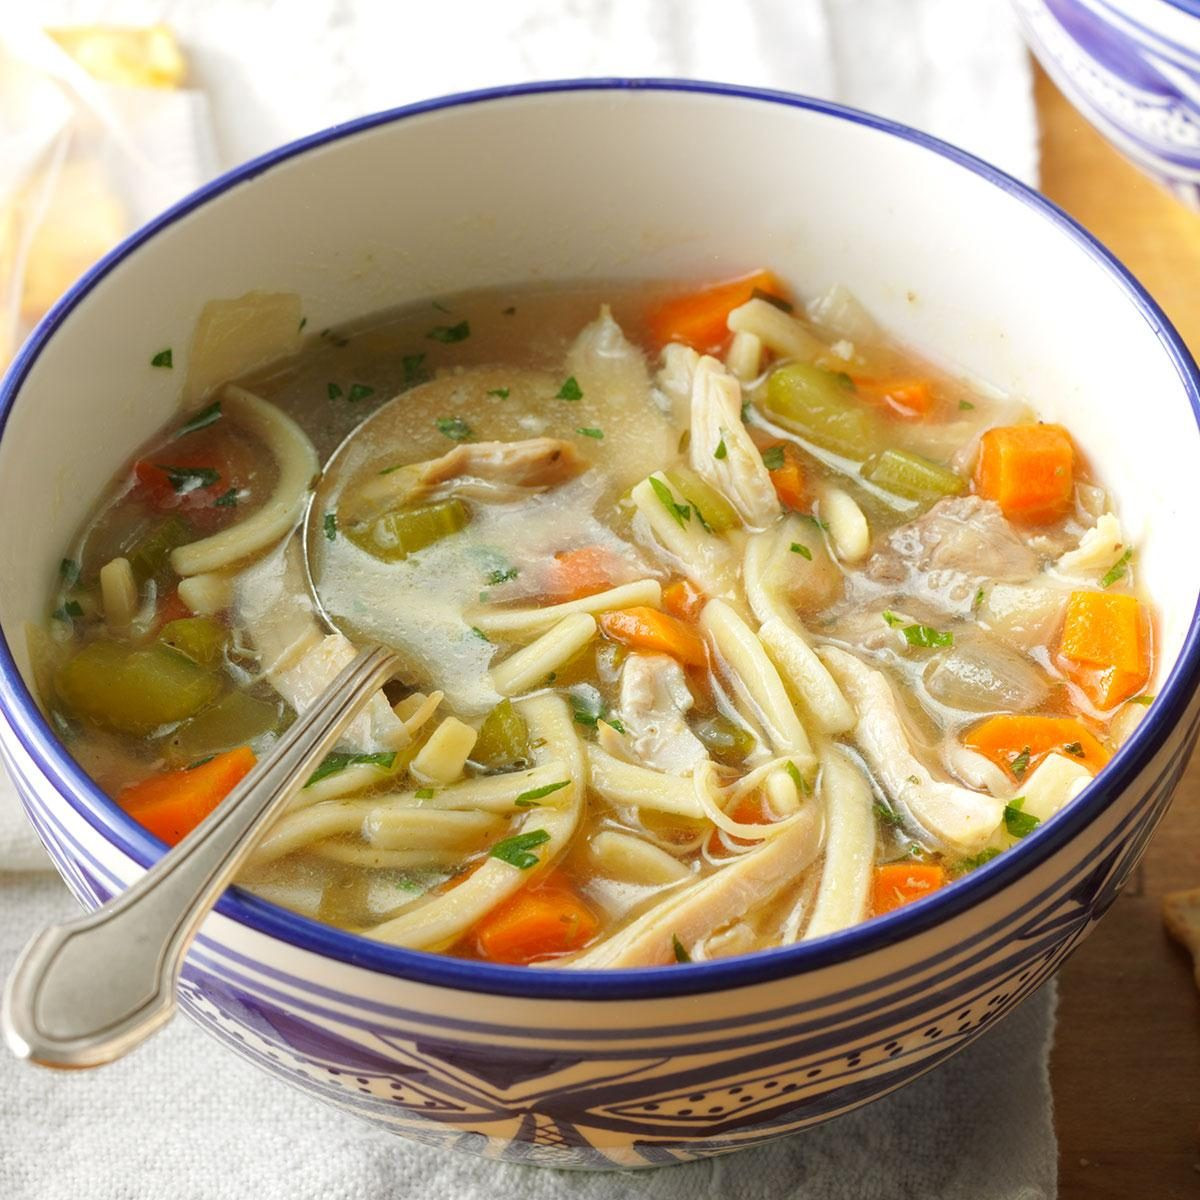 Chicken Noodle Soup Recipe Easy
 The Ultimate Chicken Noodle Soup Recipe